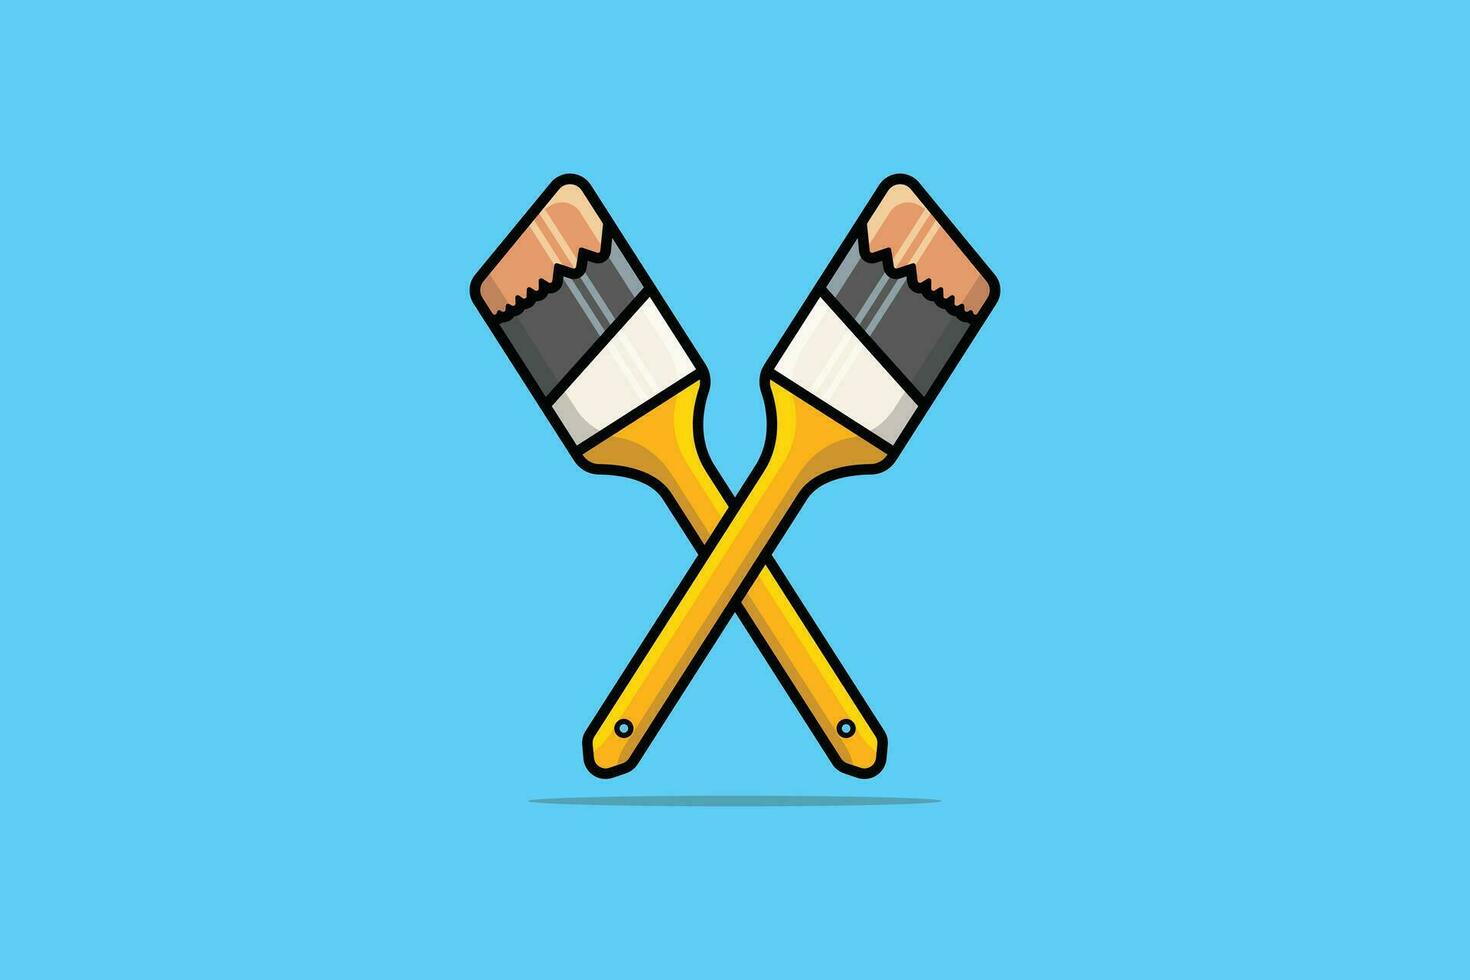 Paint Color Floating on Paint Brush vector illustration. Painting tool element icon concept. Art and paint brush icon design on blue background.